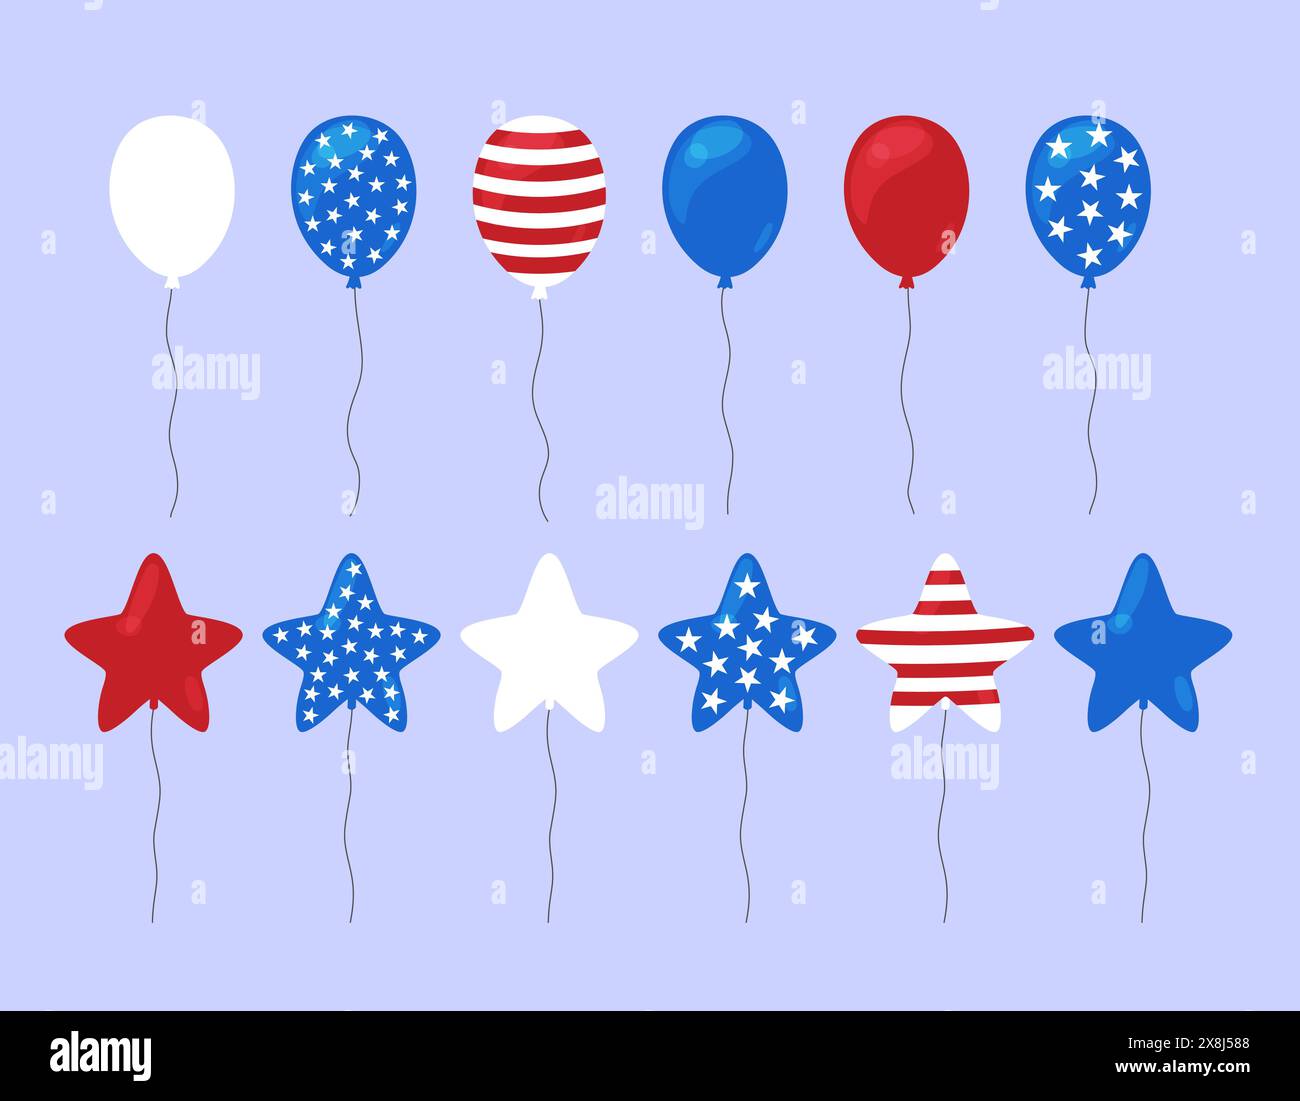 USA balloons vector set. Flat illustration of decorative elements for Independence Day or other American holidays in United States flag colors Stock Vector